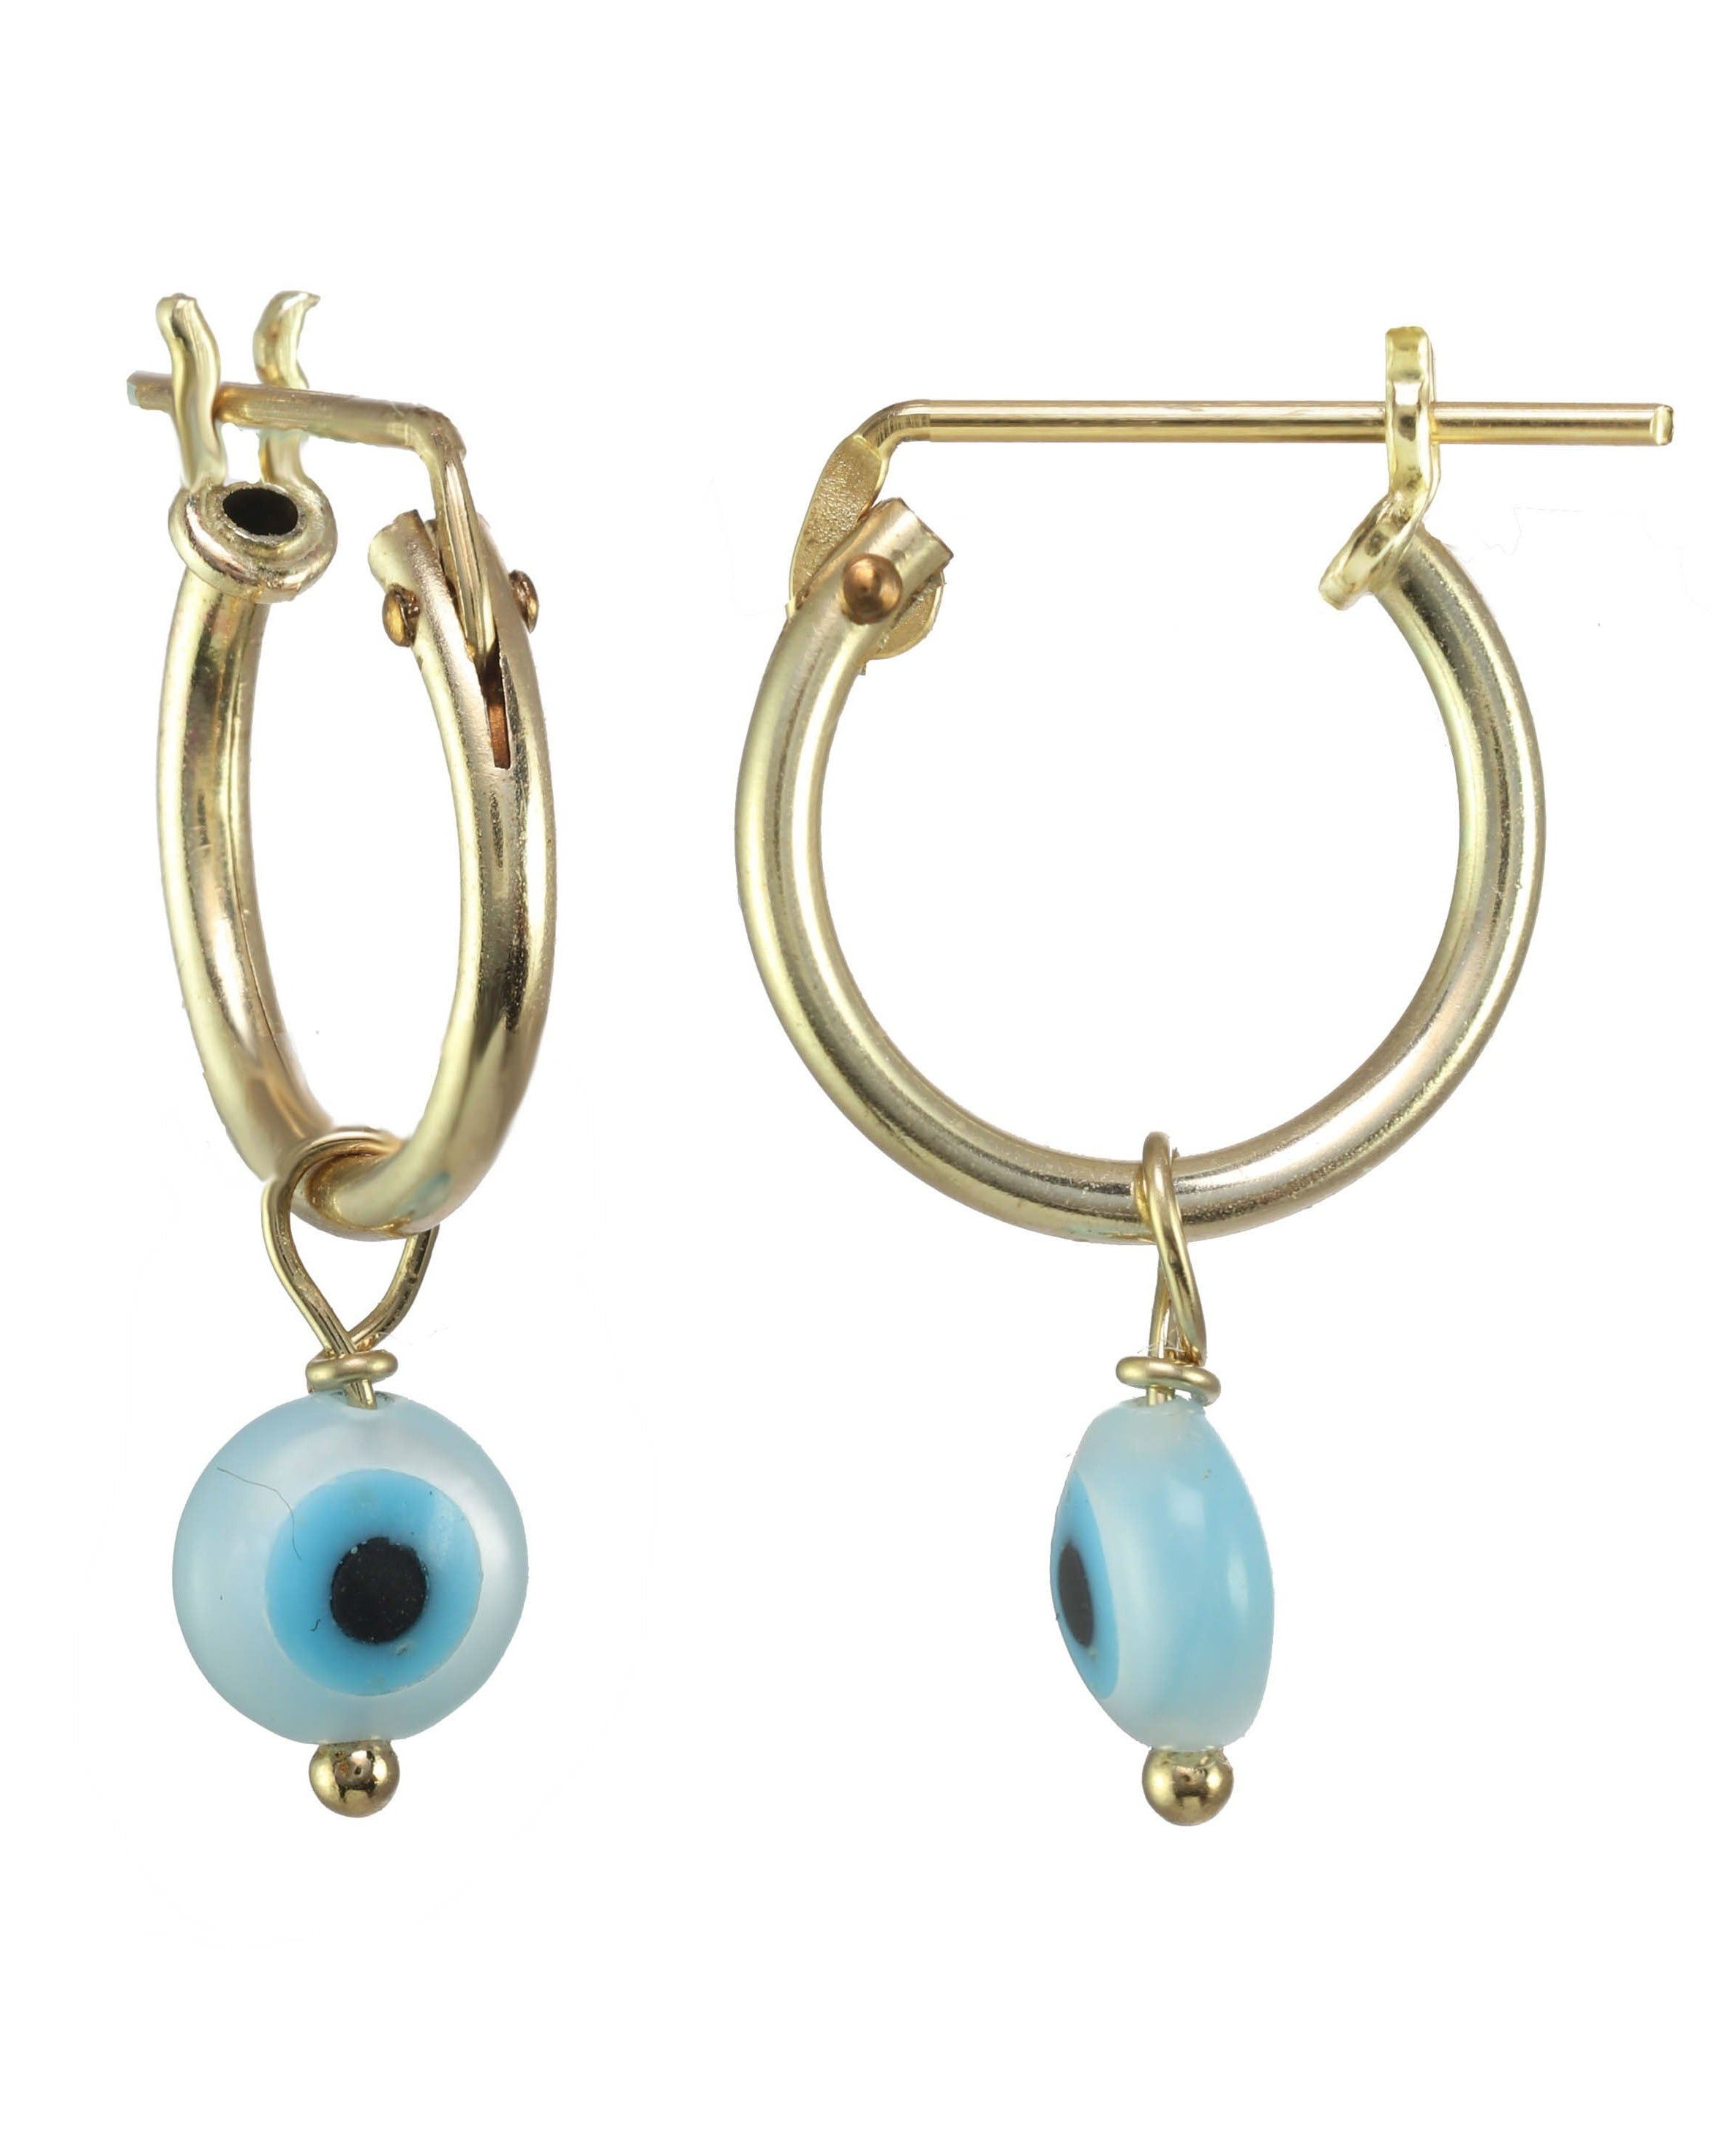 Ellie Hoops by Kozakh. 12mm hoop earrings, crafted in 14K Gold Filled, featuring a Mother of Pearl Evil Eye.